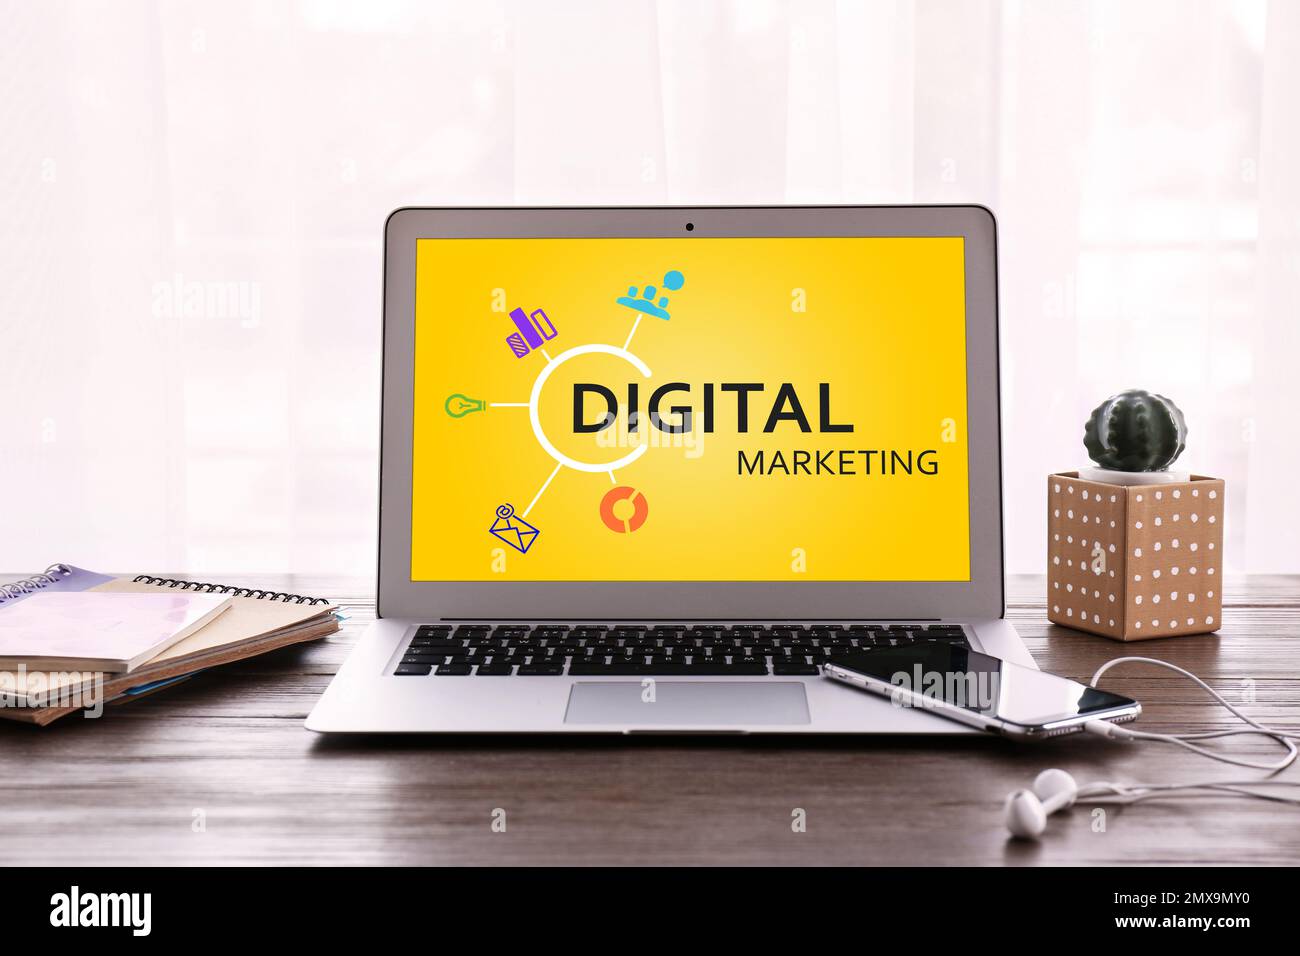 Digital marketing concept. Modern laptop on wooden table Stock Photo